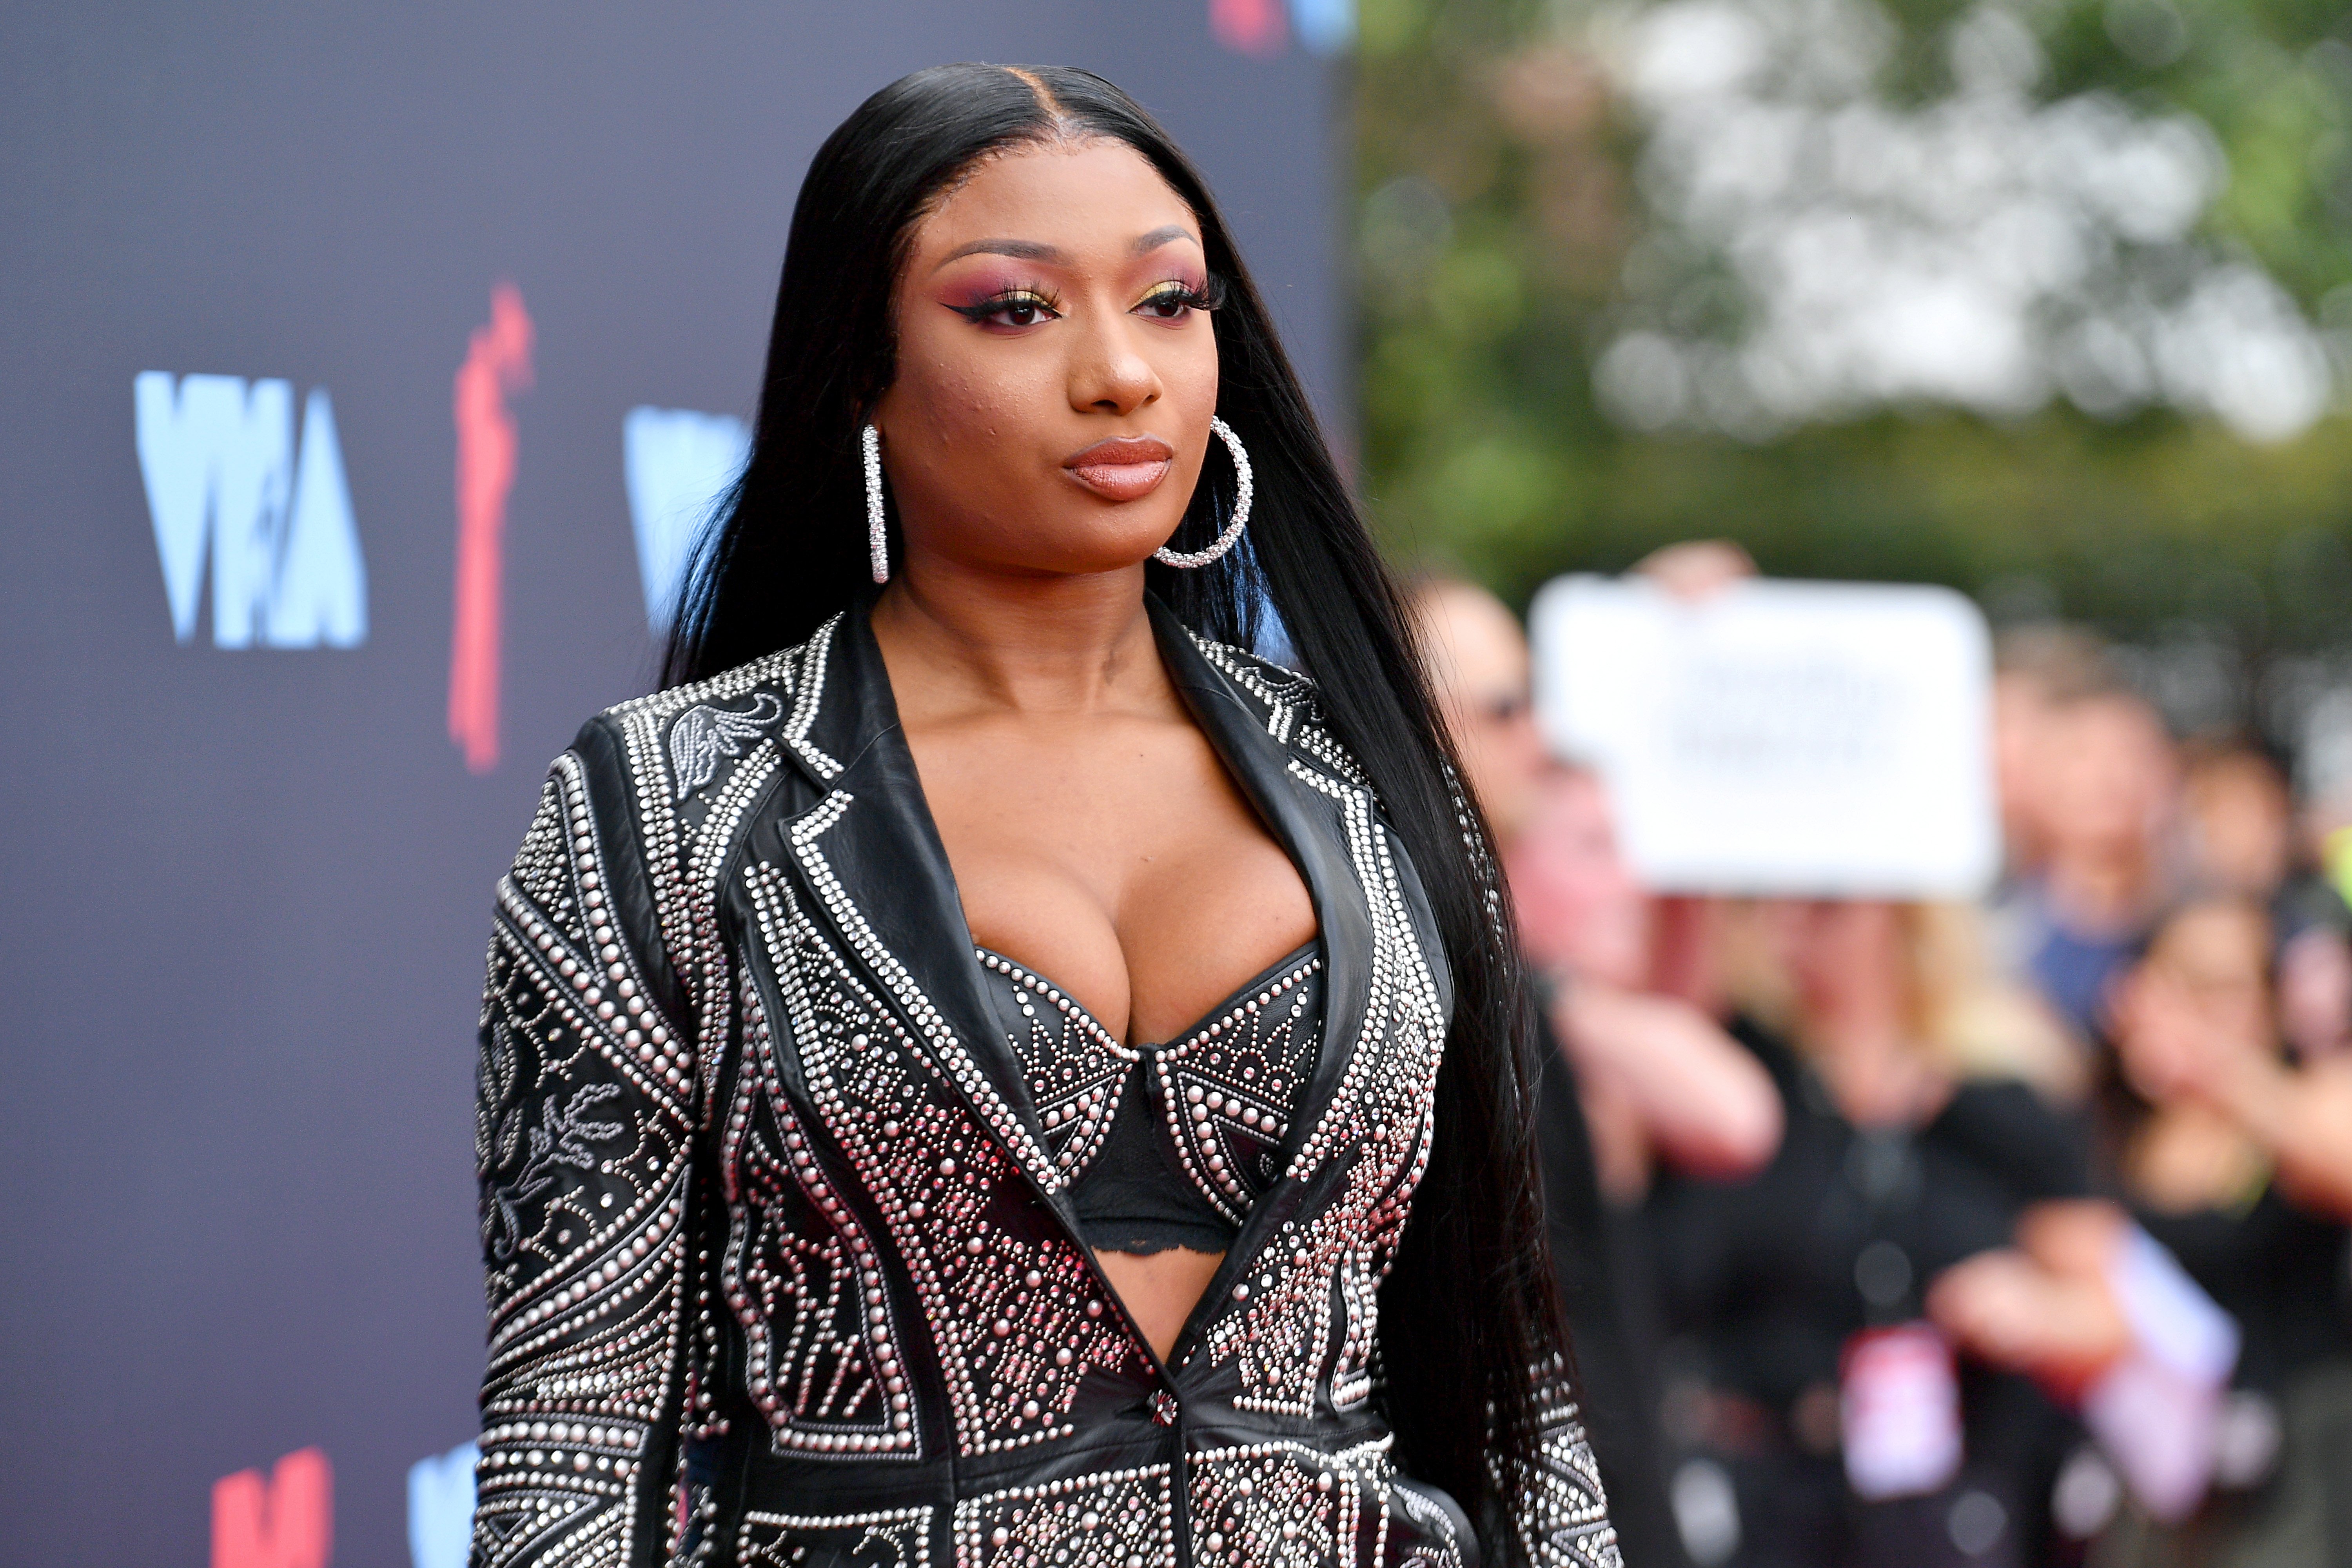 Megan Thee Stallion at the 2019 MTV Video Music Awards on August 26, 2019 in Newark, New Jersey. | Photo: Getty Images